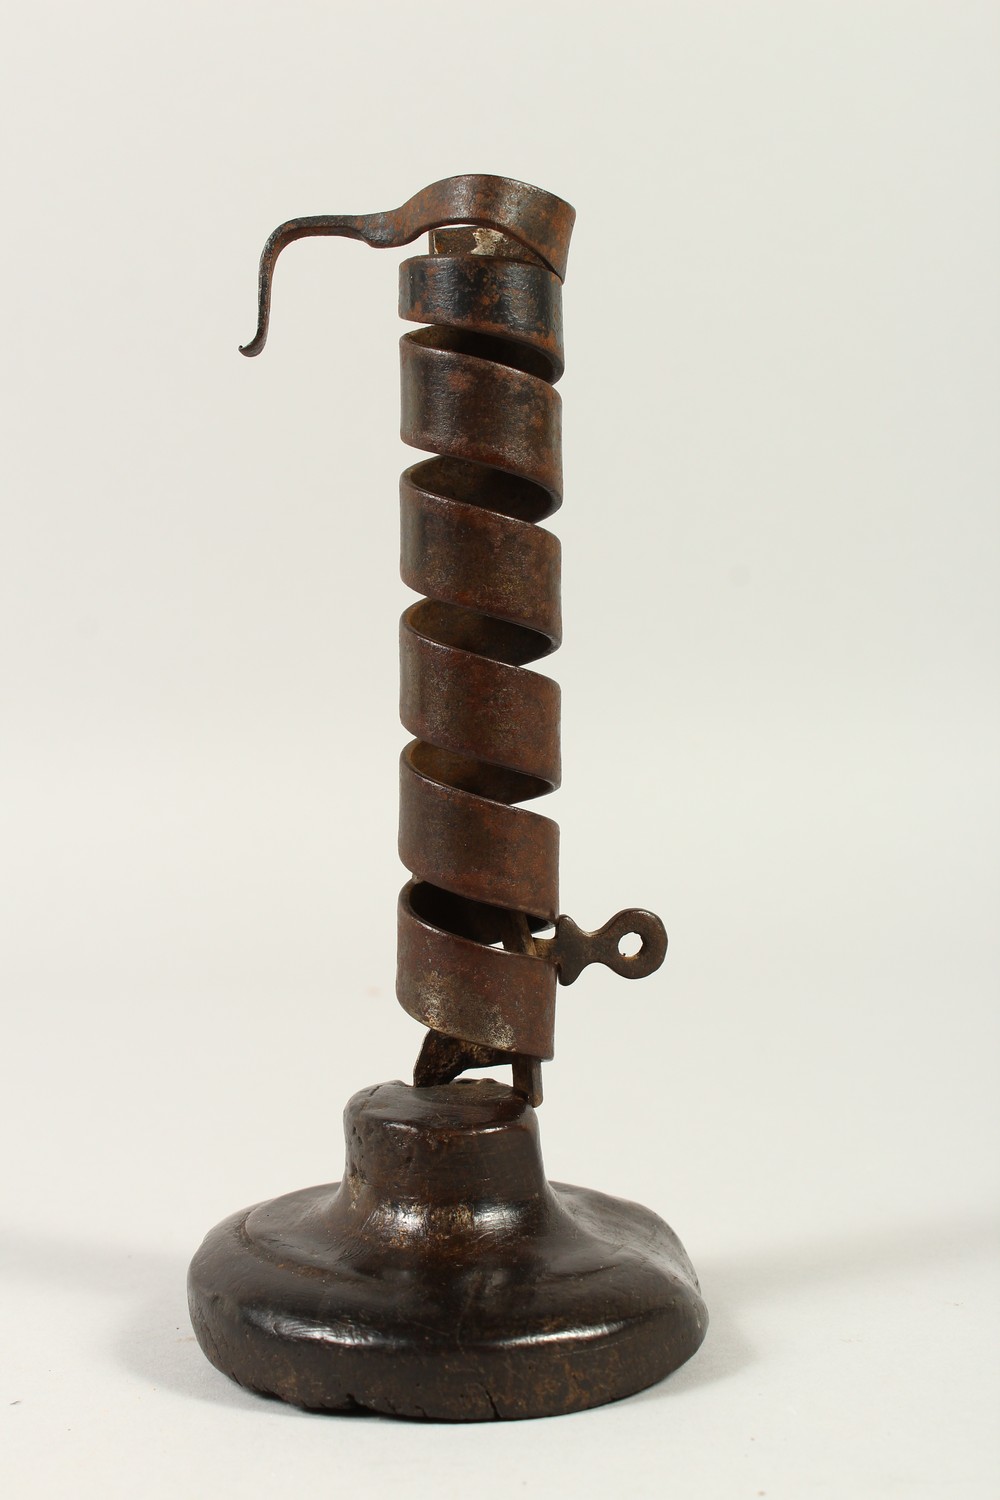 AN EARLY IRON CANDLESTICK, on a wooden base. 19cms high. - Image 2 of 3